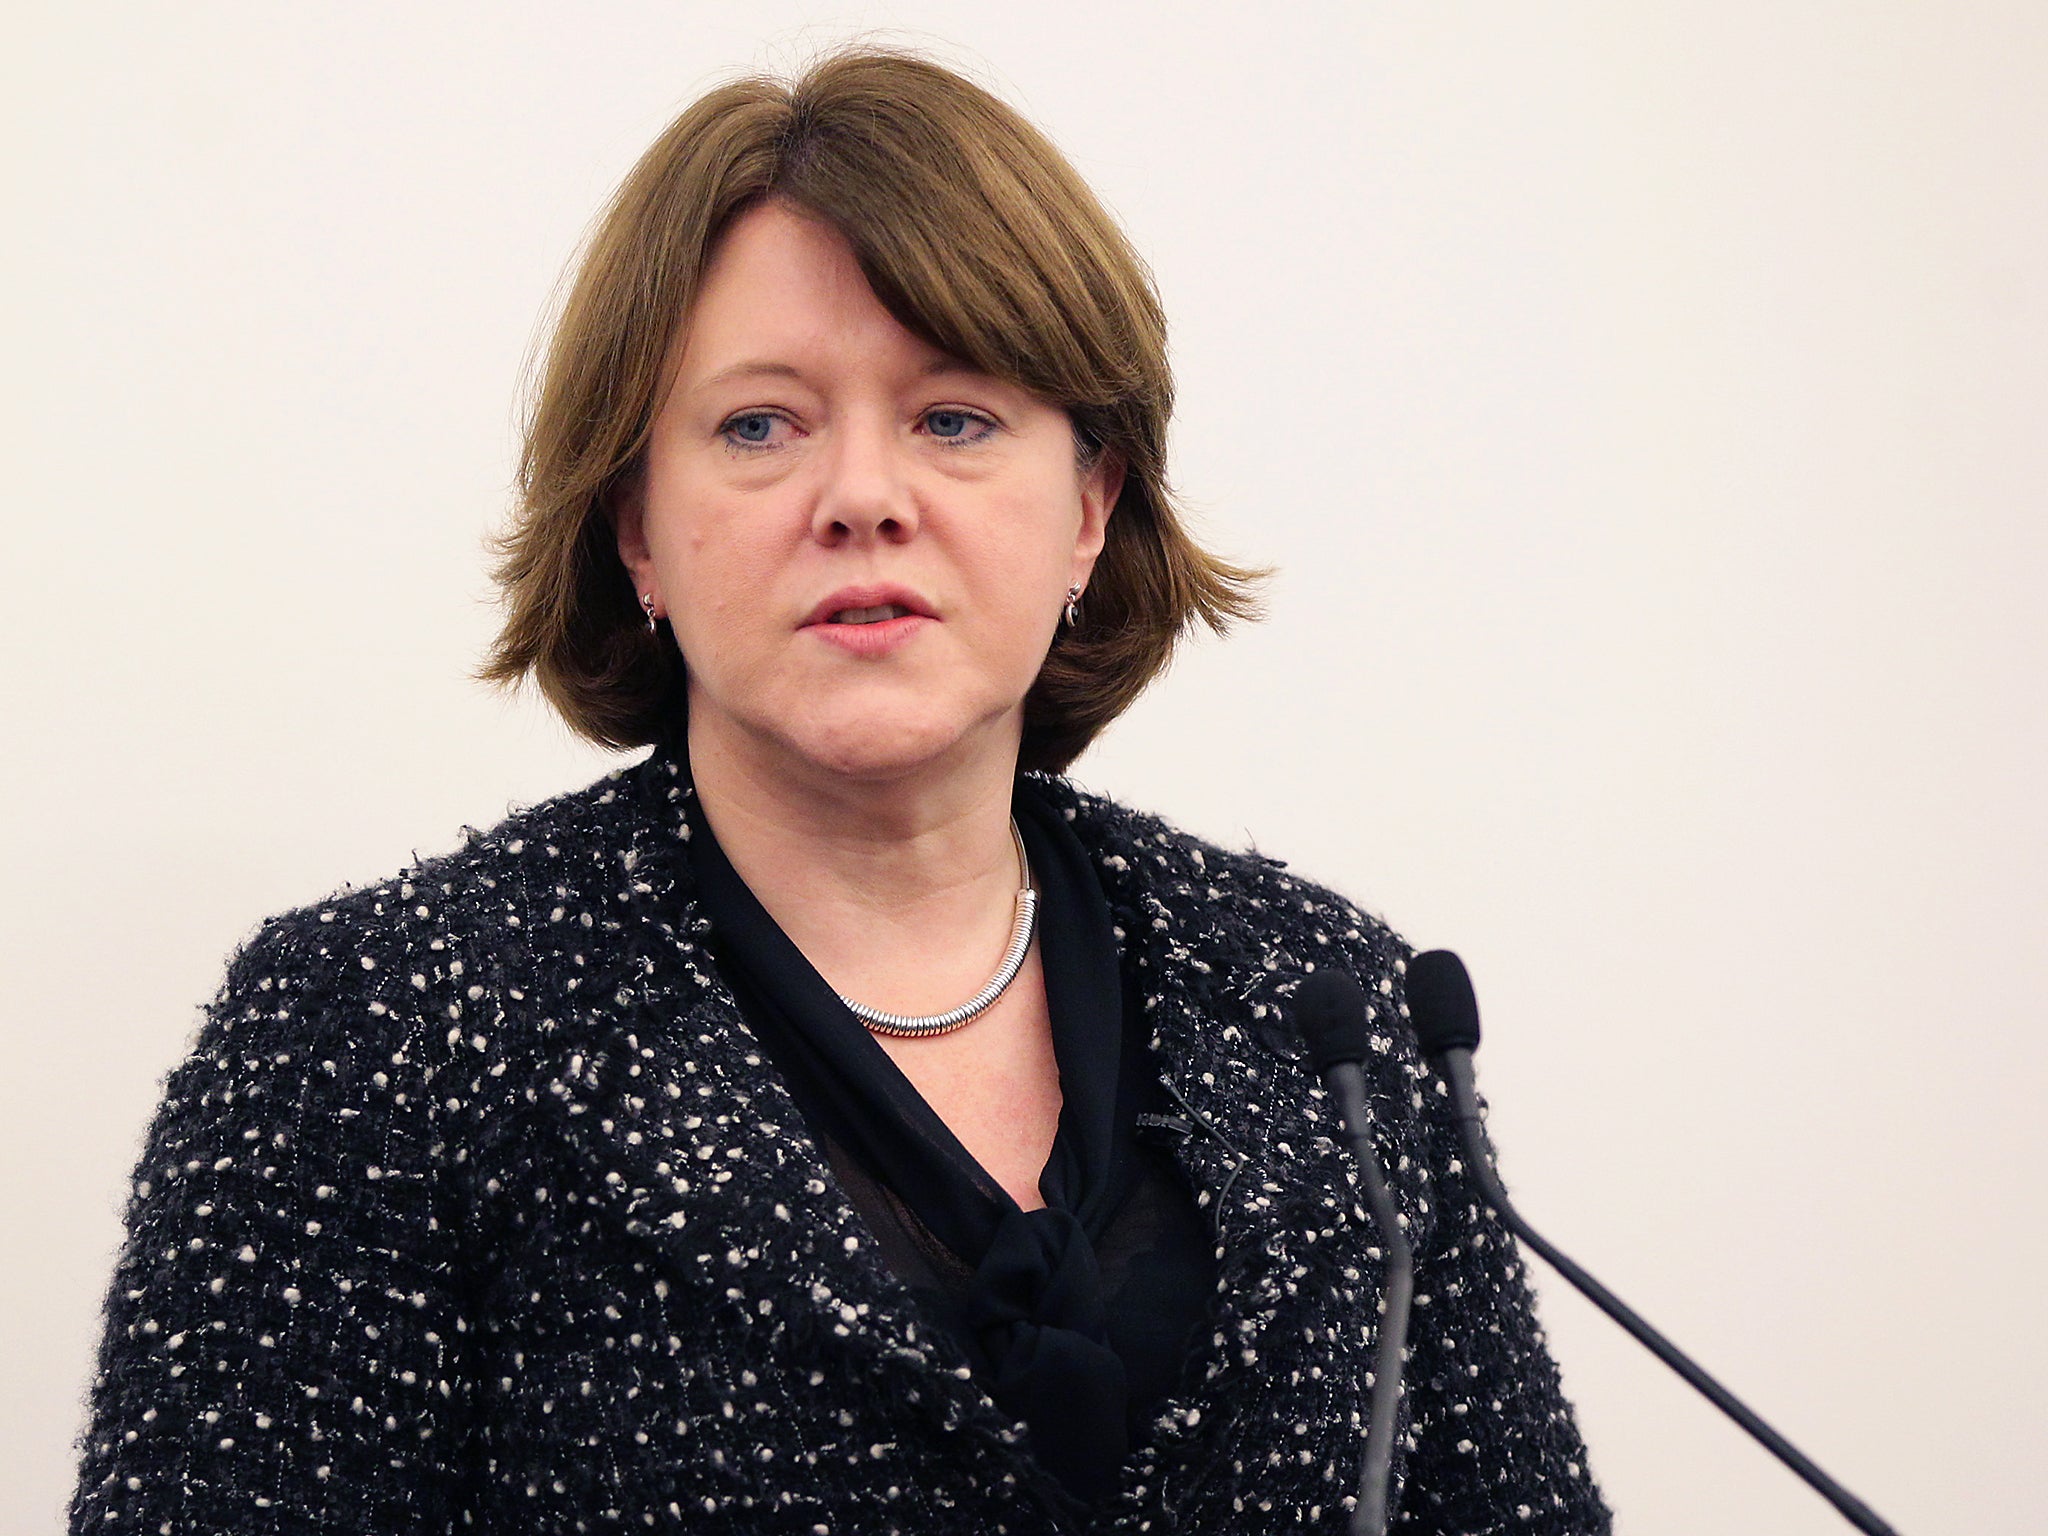 MP Maria Miller, chair of the Women and Equalities Committee, has criticised the Government for its lack of action on equal pay